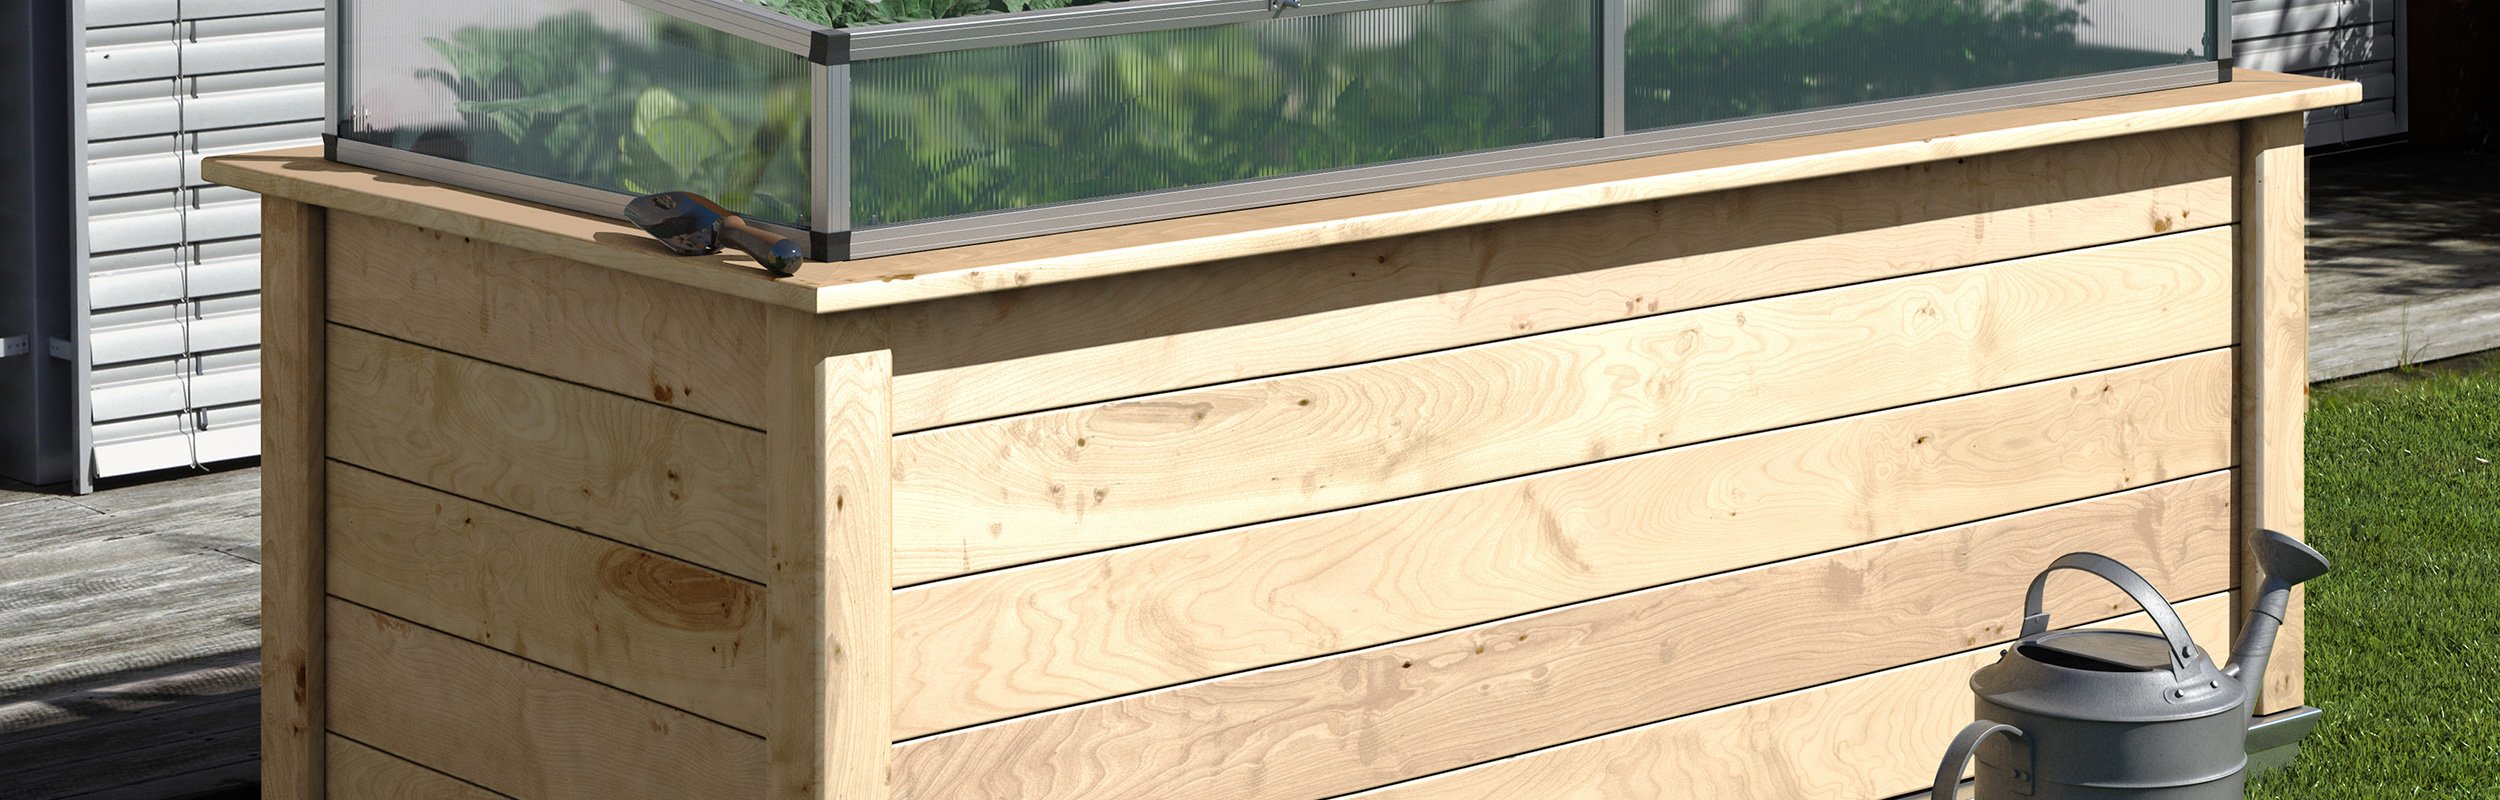 Large wooden raised bed Woody